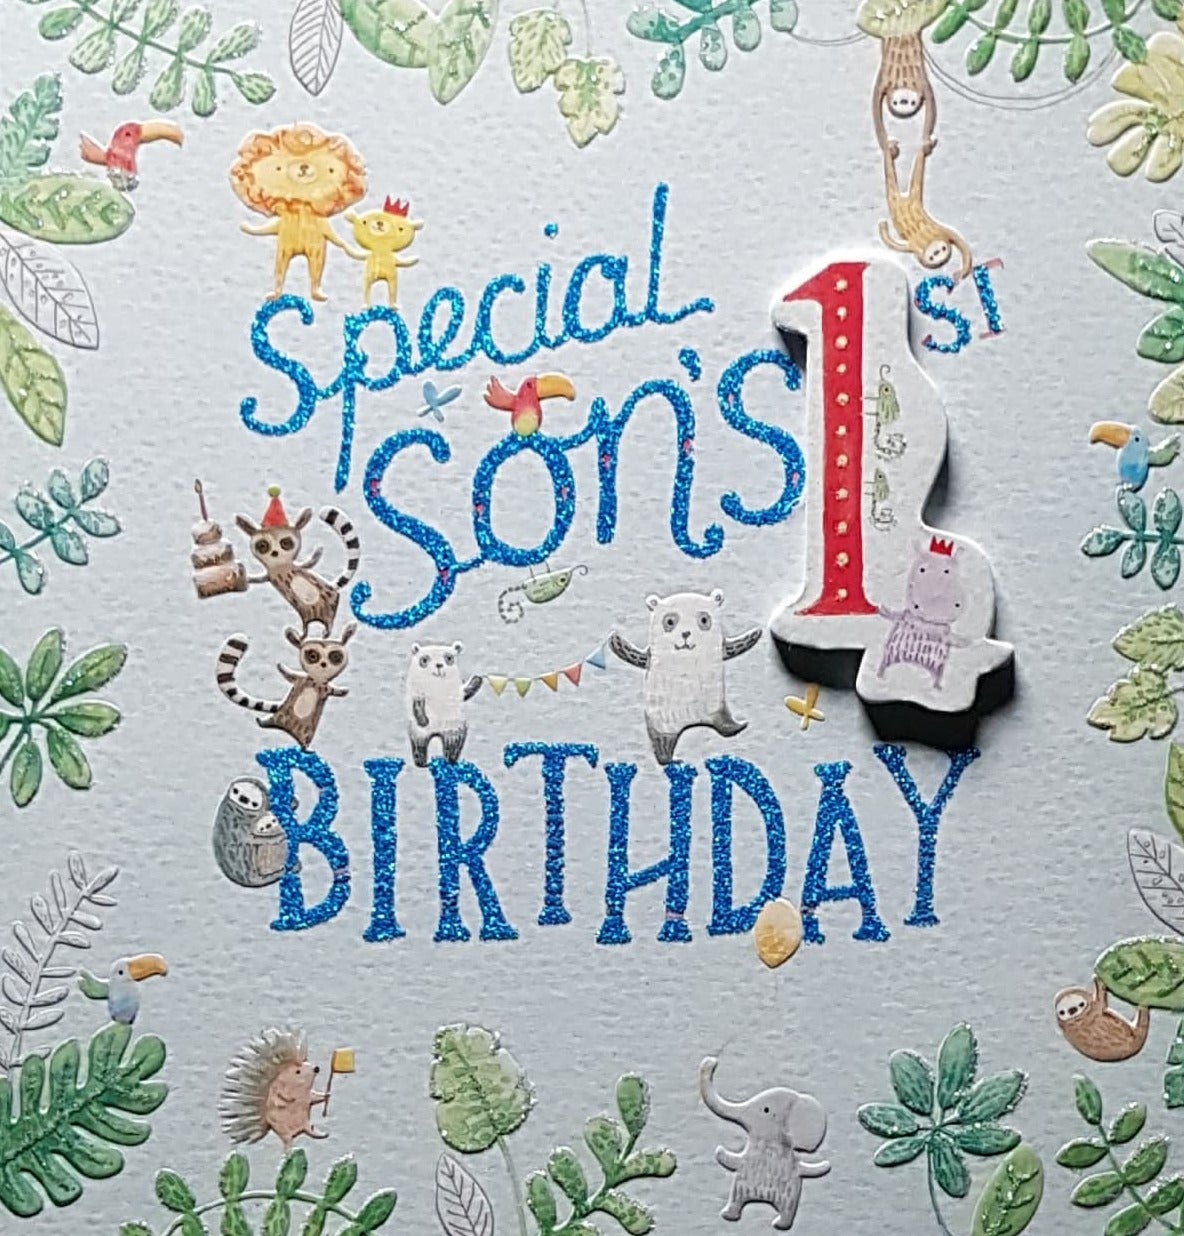 Age 1 Birthday Card - Son / Little Animals Having A Great Fun In A Jungle